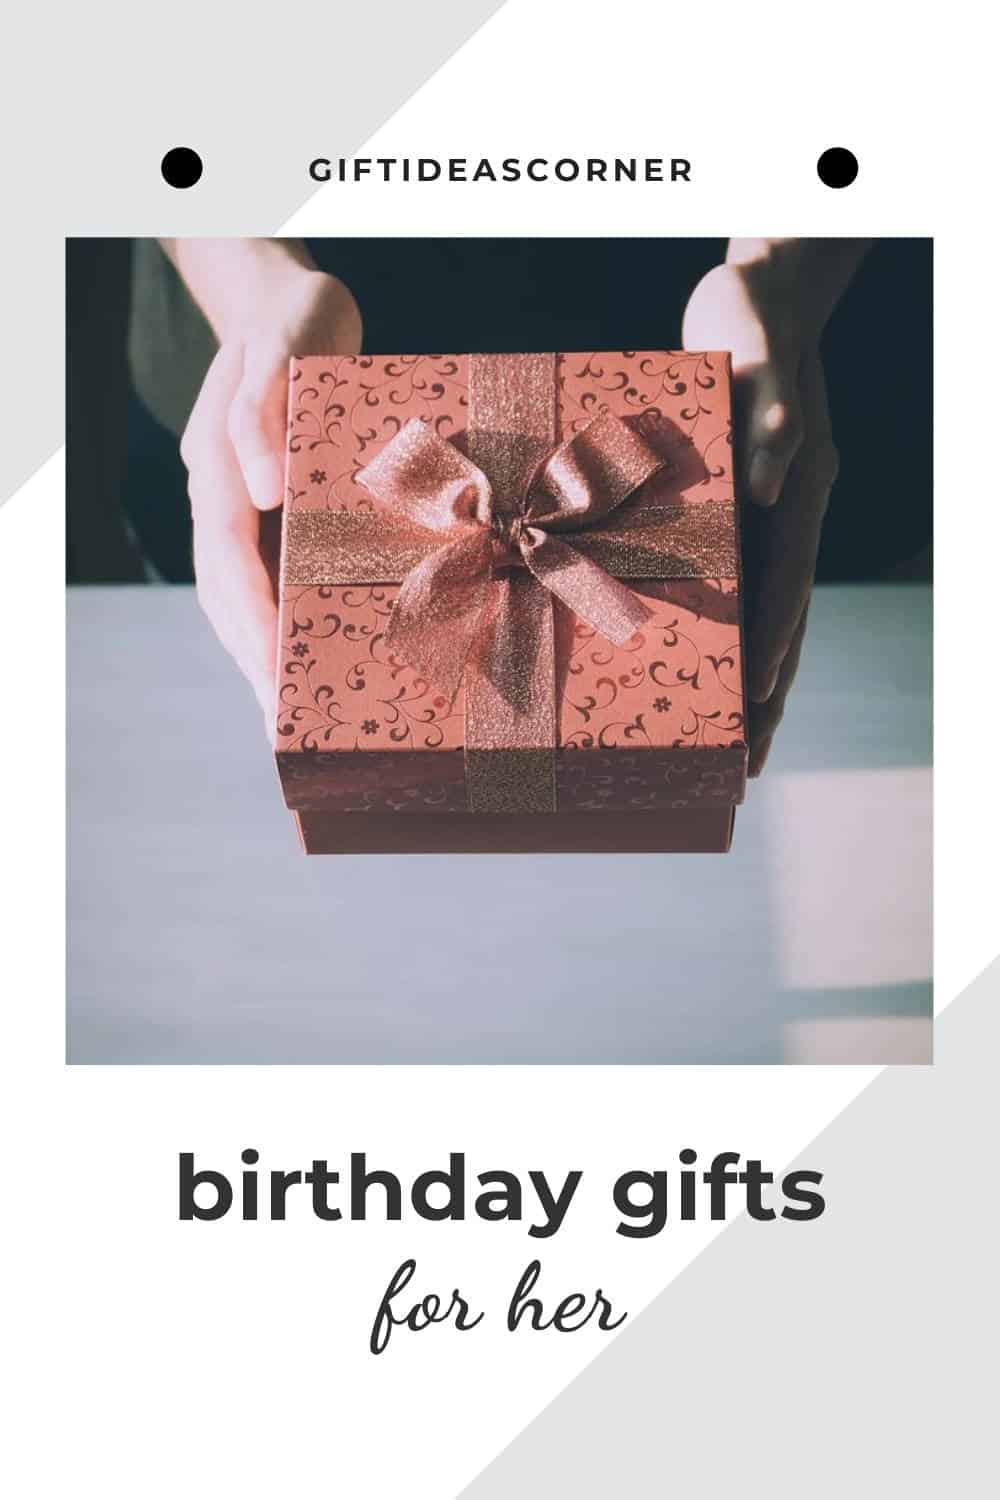 2. A lovely birthday gift for her is extremely important since (almost) everyone considers their birthday the most special occasion. The chance of her feeling moved and appreciated is super high if you bring her something other than cakes, champagnes, and flowers.